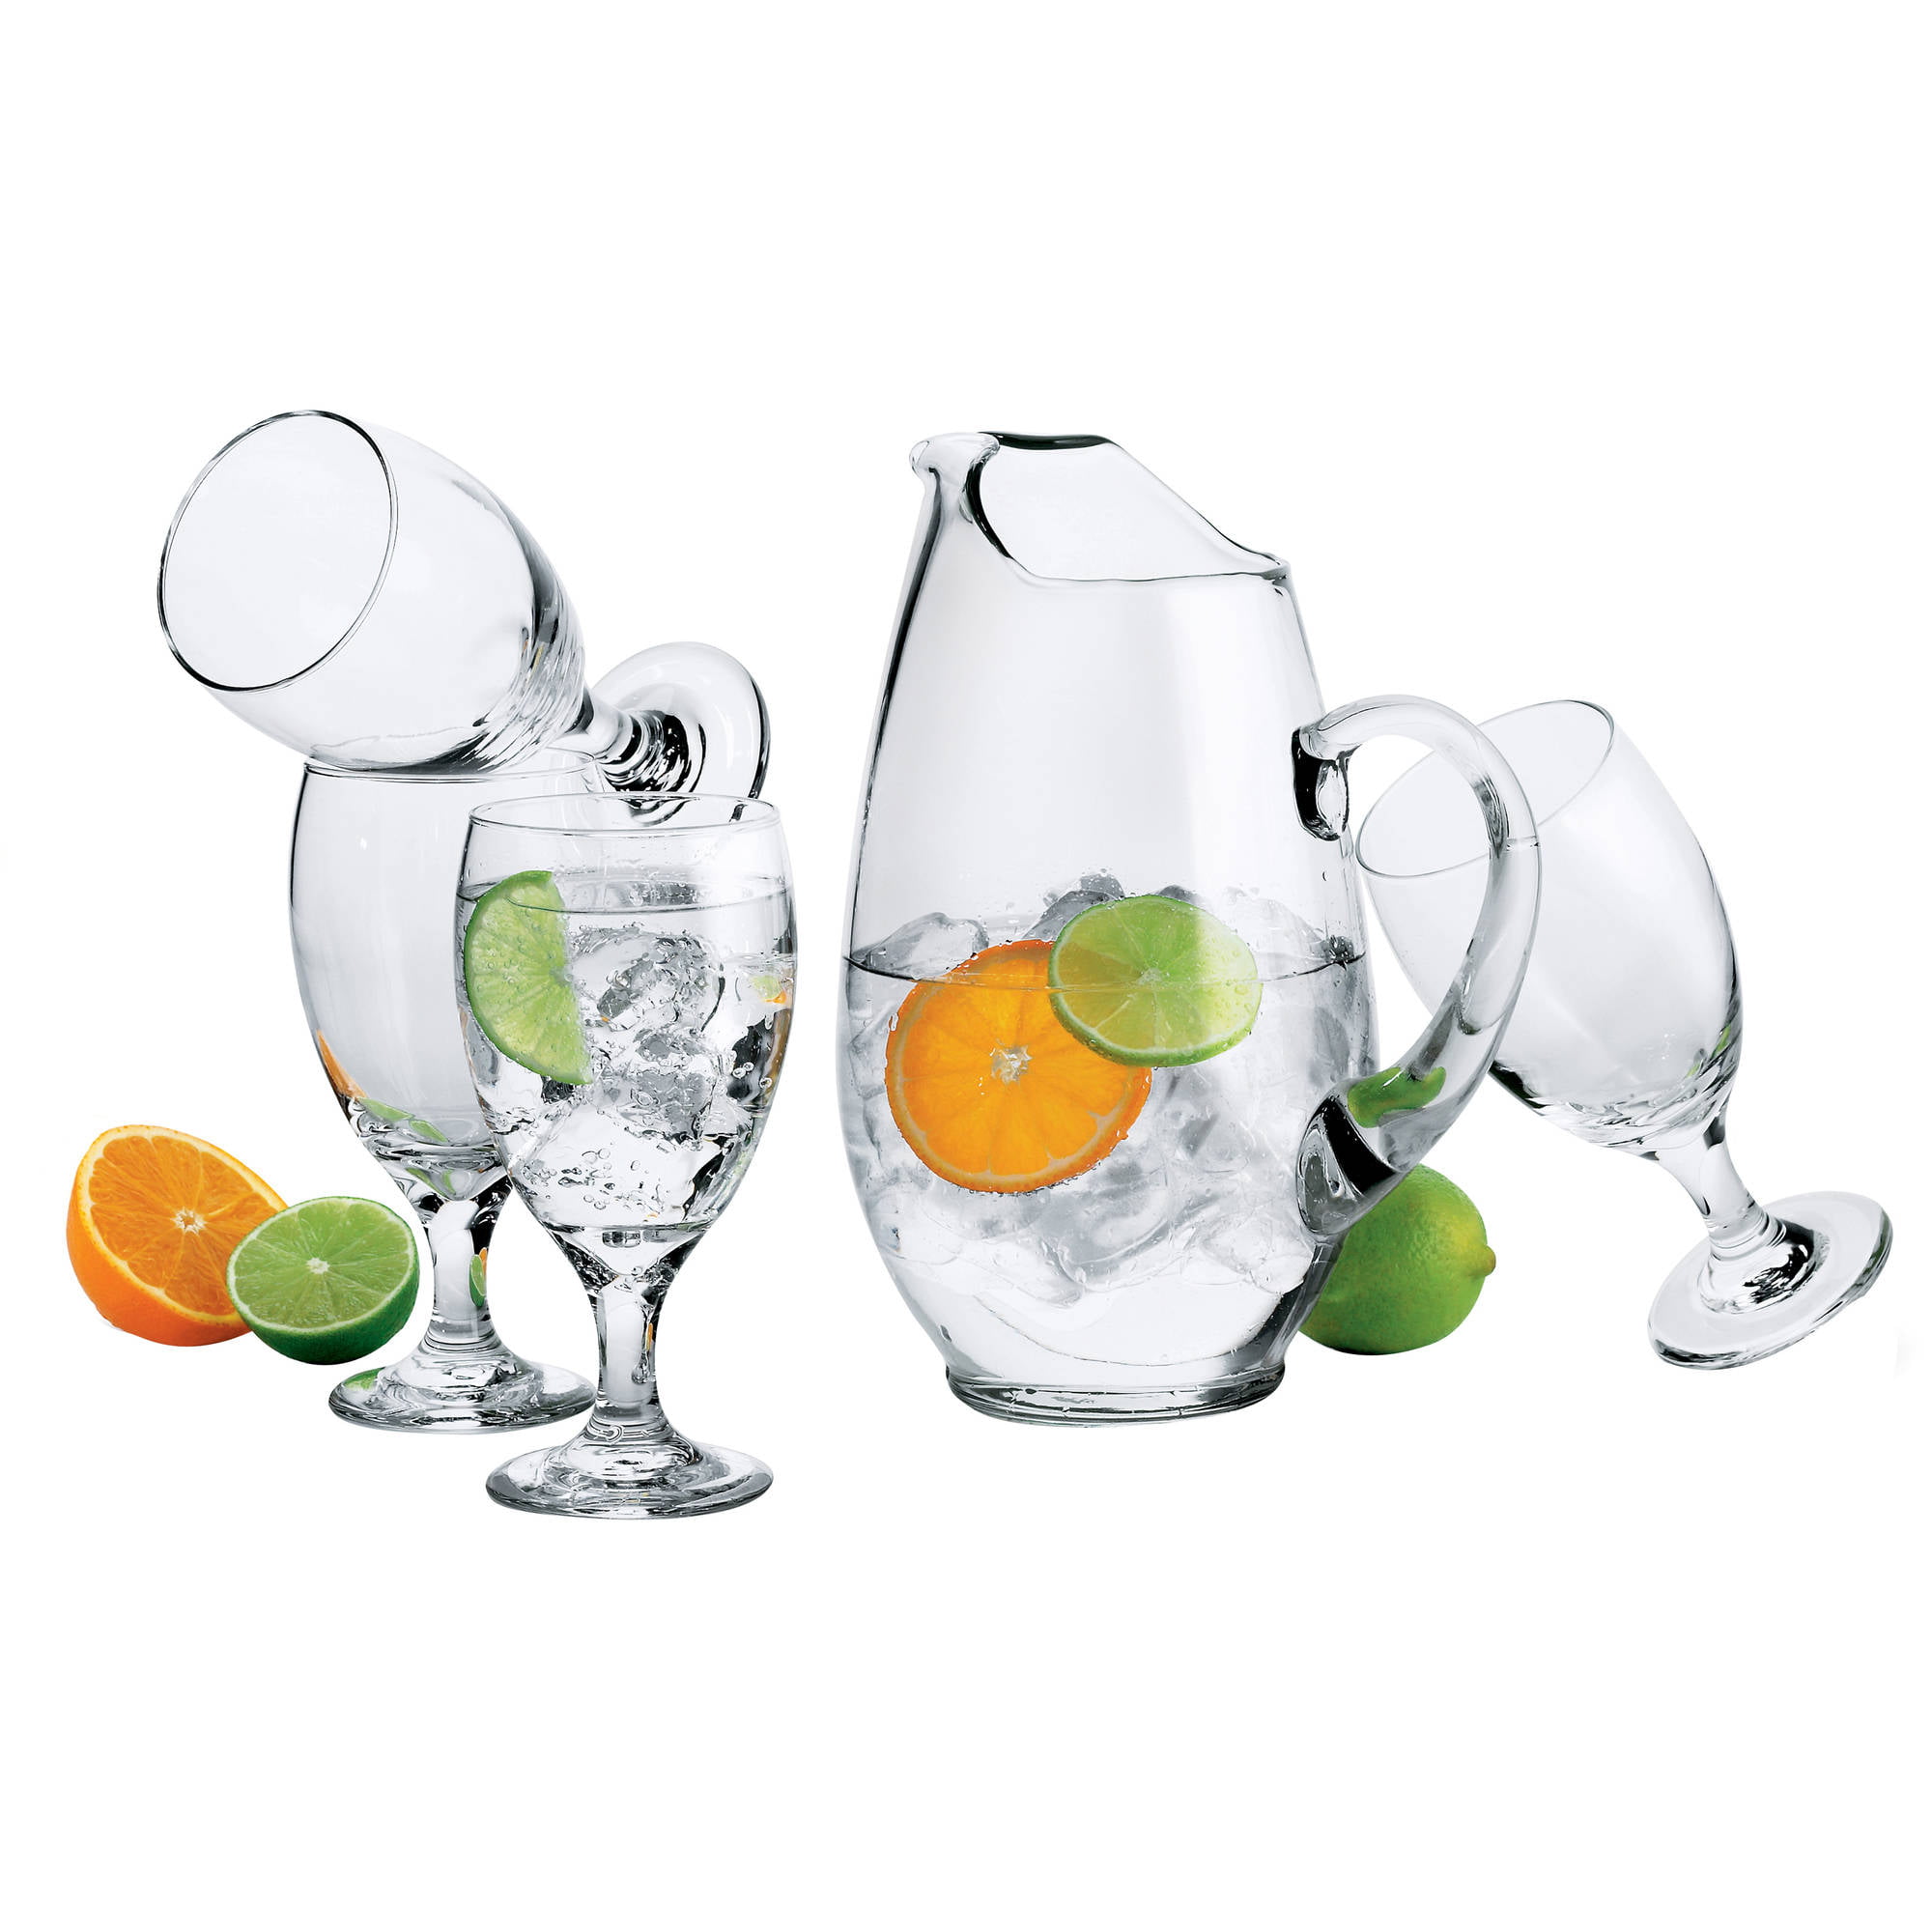 Libbey Glass Pitcher and Tumblers, 7-piece set